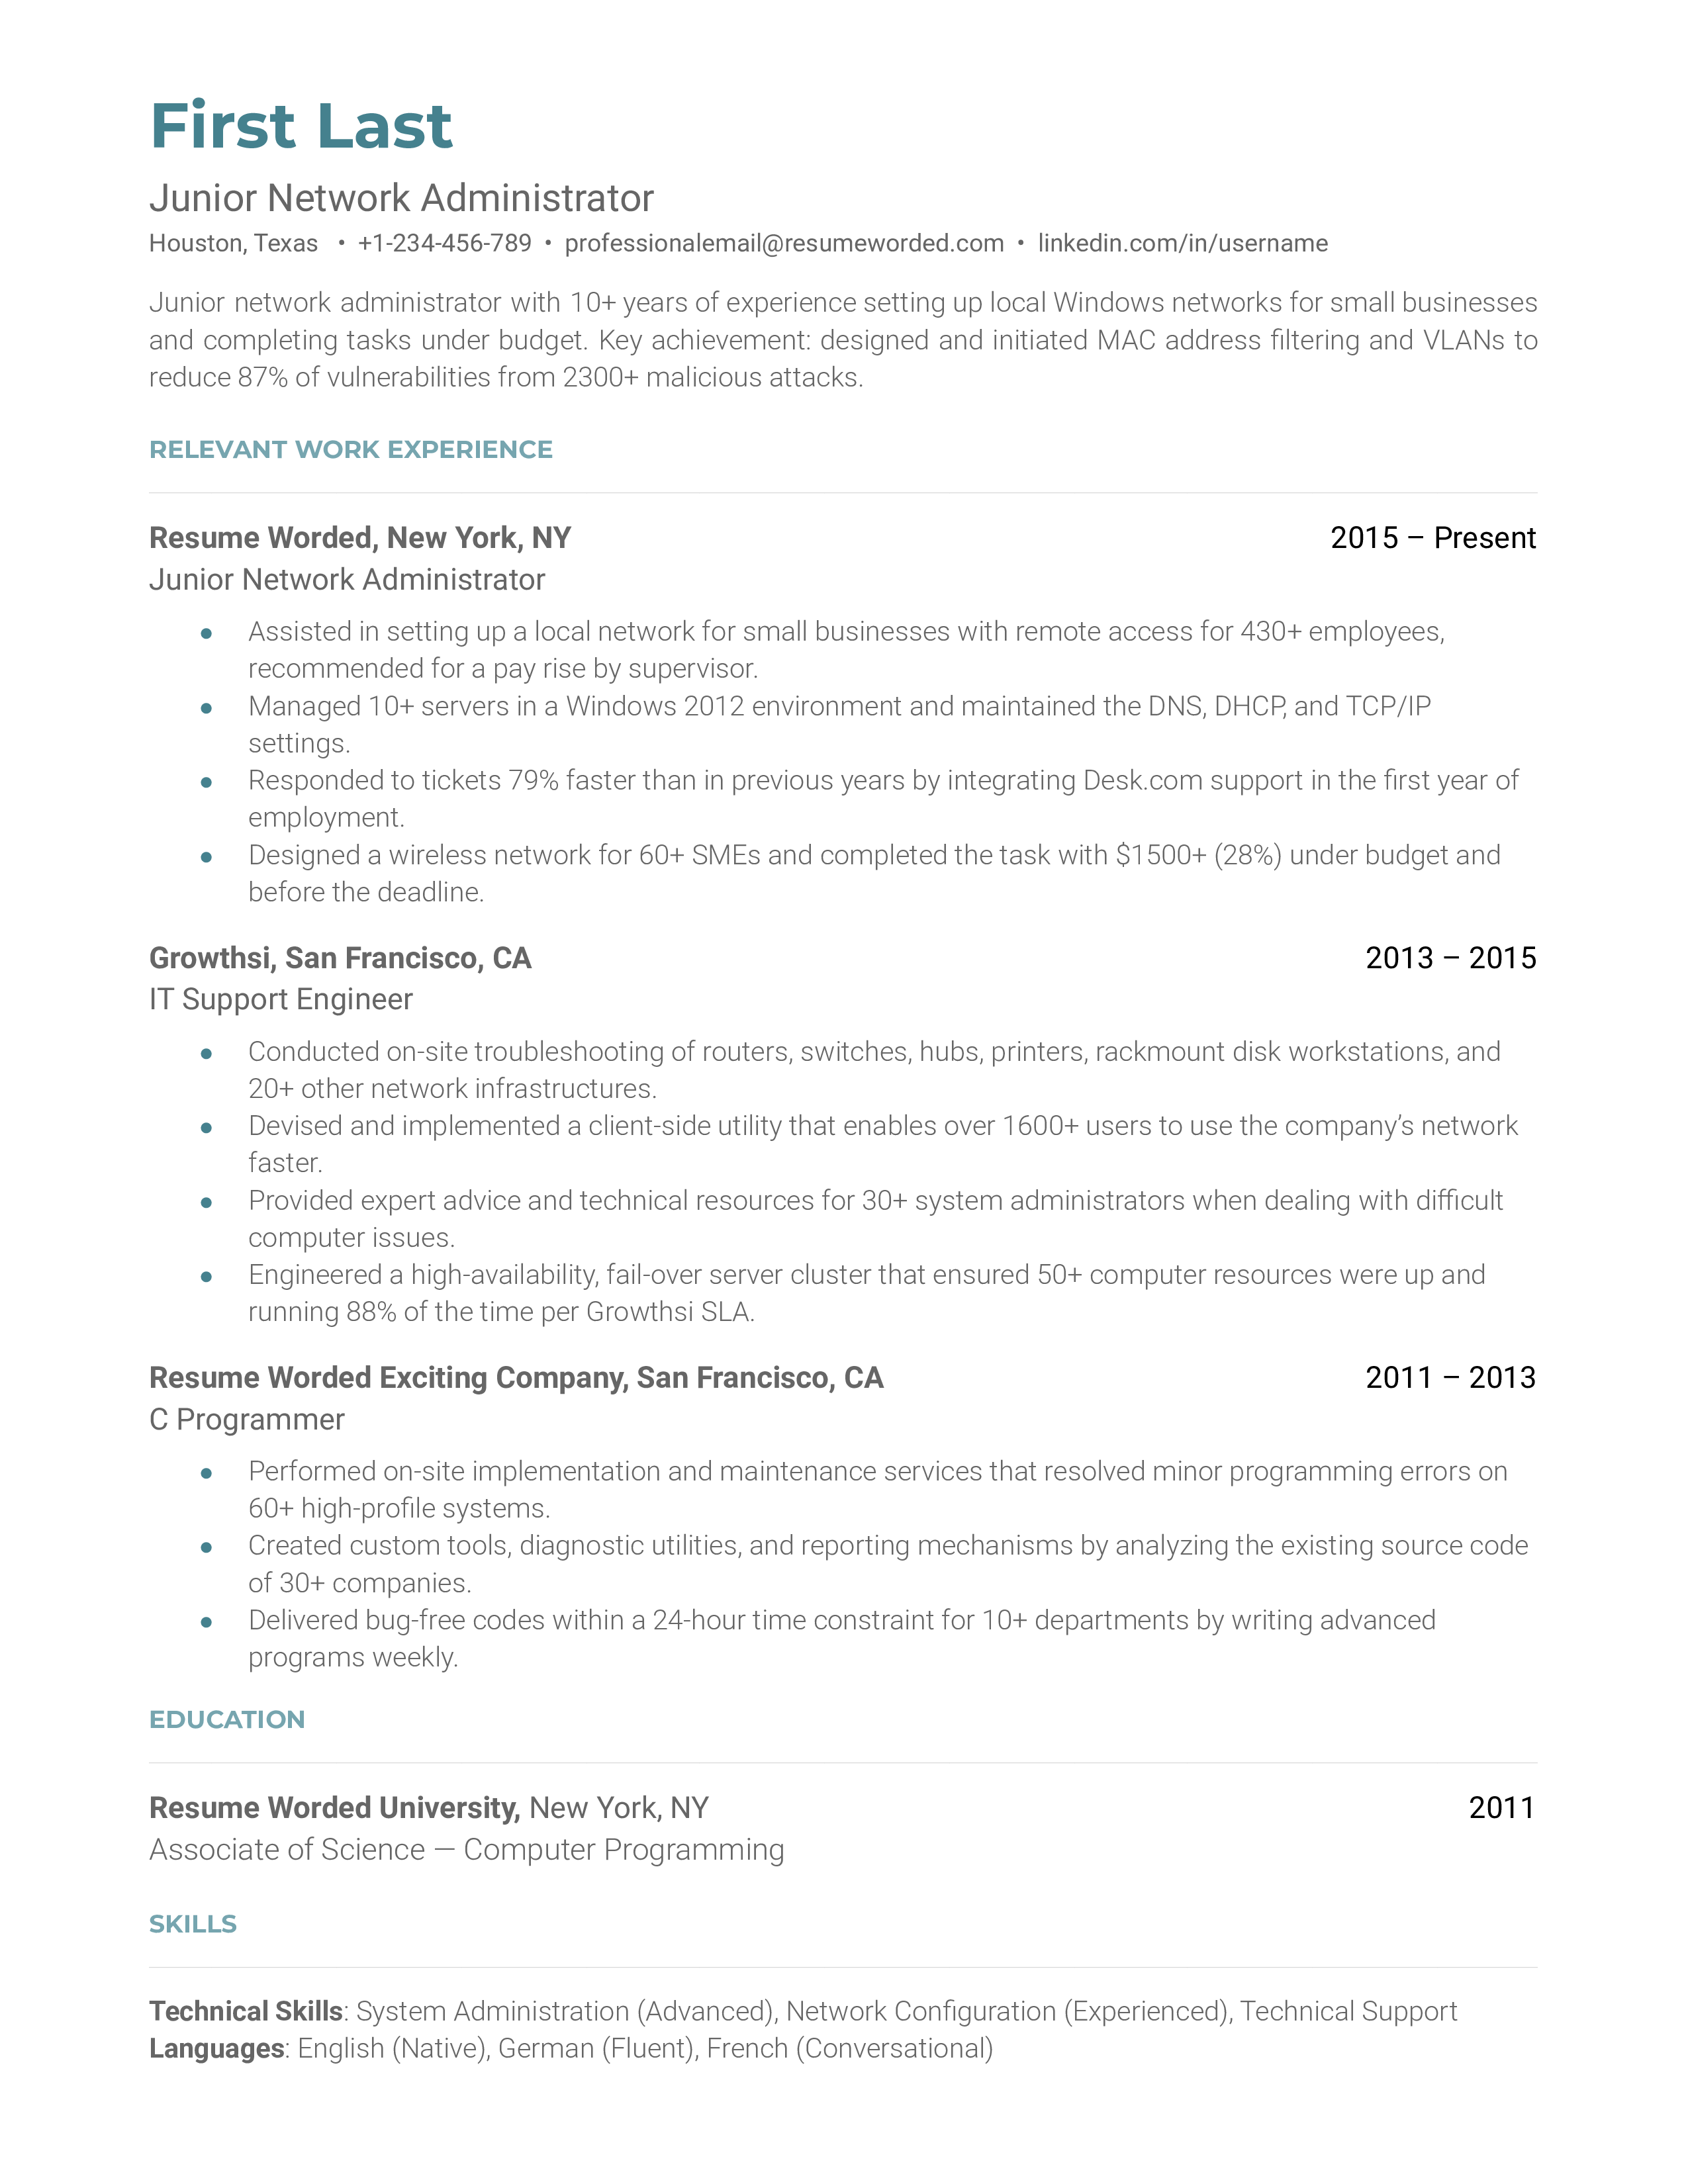 A CV layout showcasing skills and achievements for a Junior Network Administrator role.